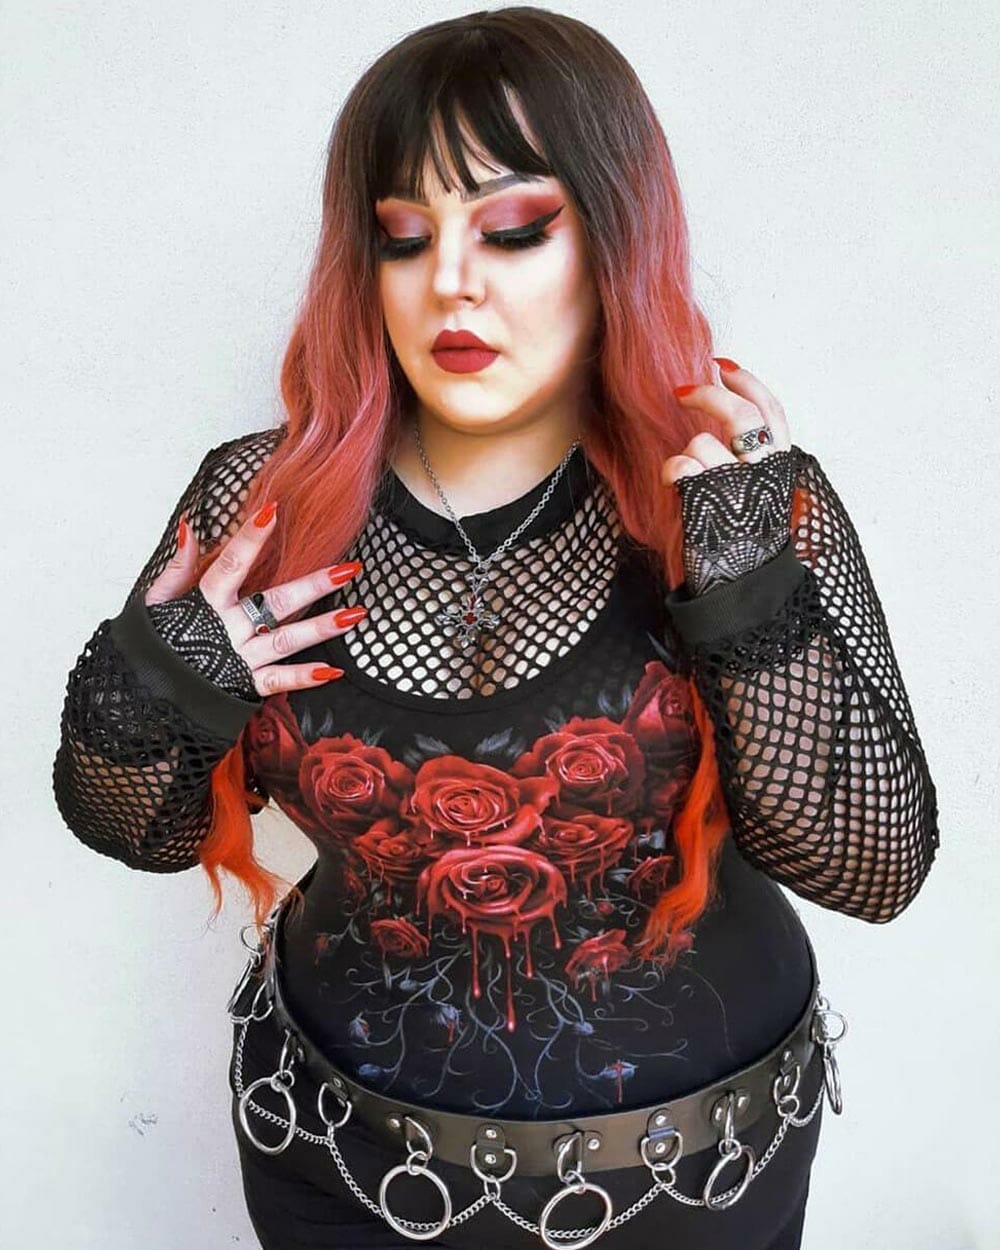 Goth Aesthetic Outfits Style How to dress like a Goth? 21 Best Goth